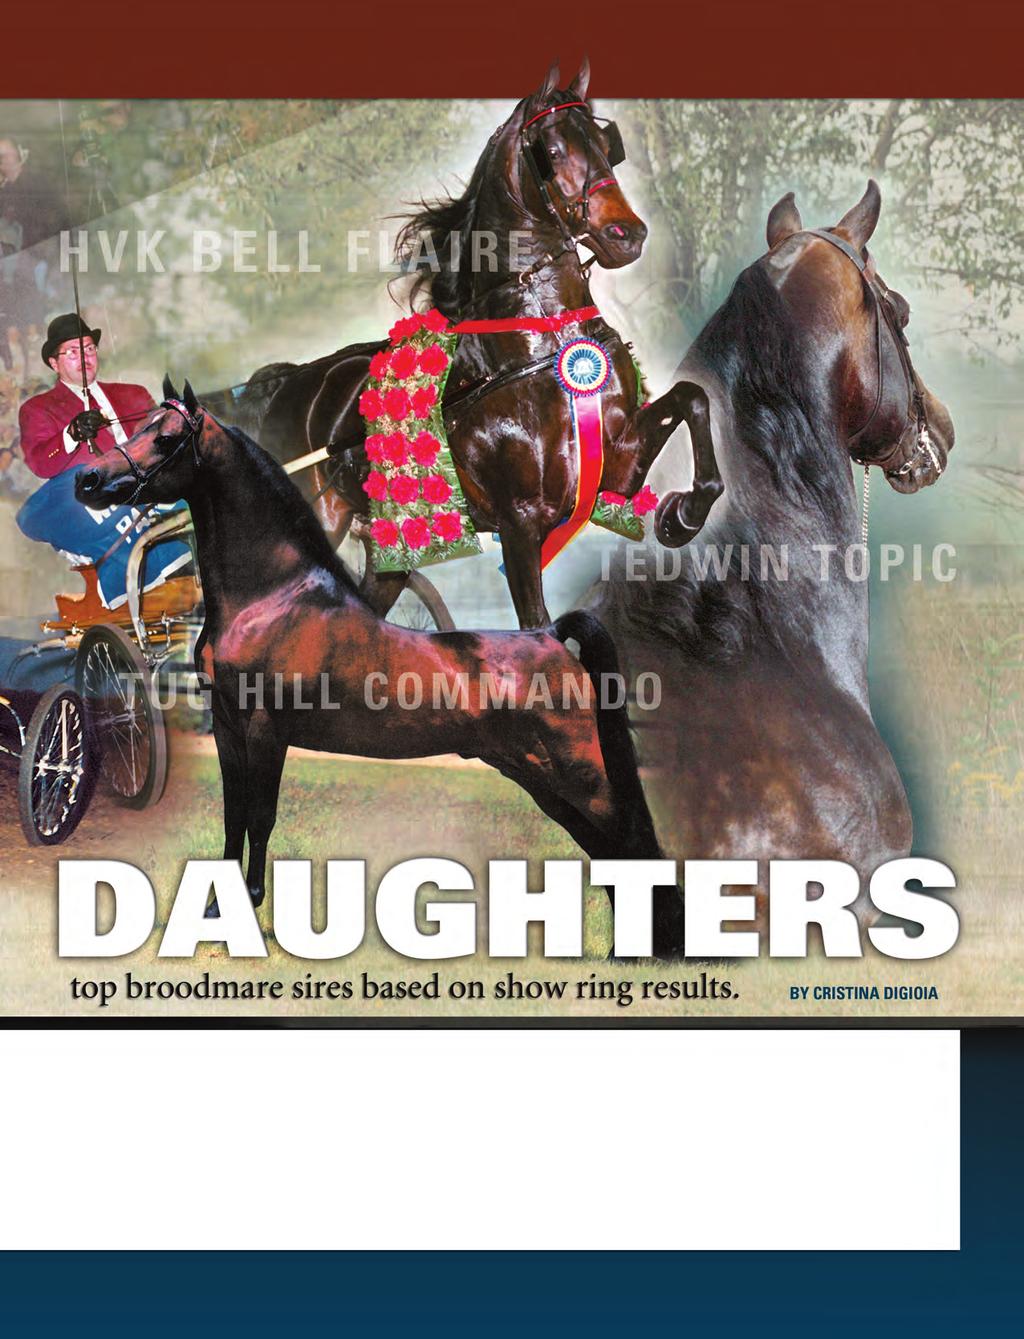 stallions have been trusted by top breeders to produce show horses of the highest caliber, so it is not surprising that their daughters are doing the same in turn.